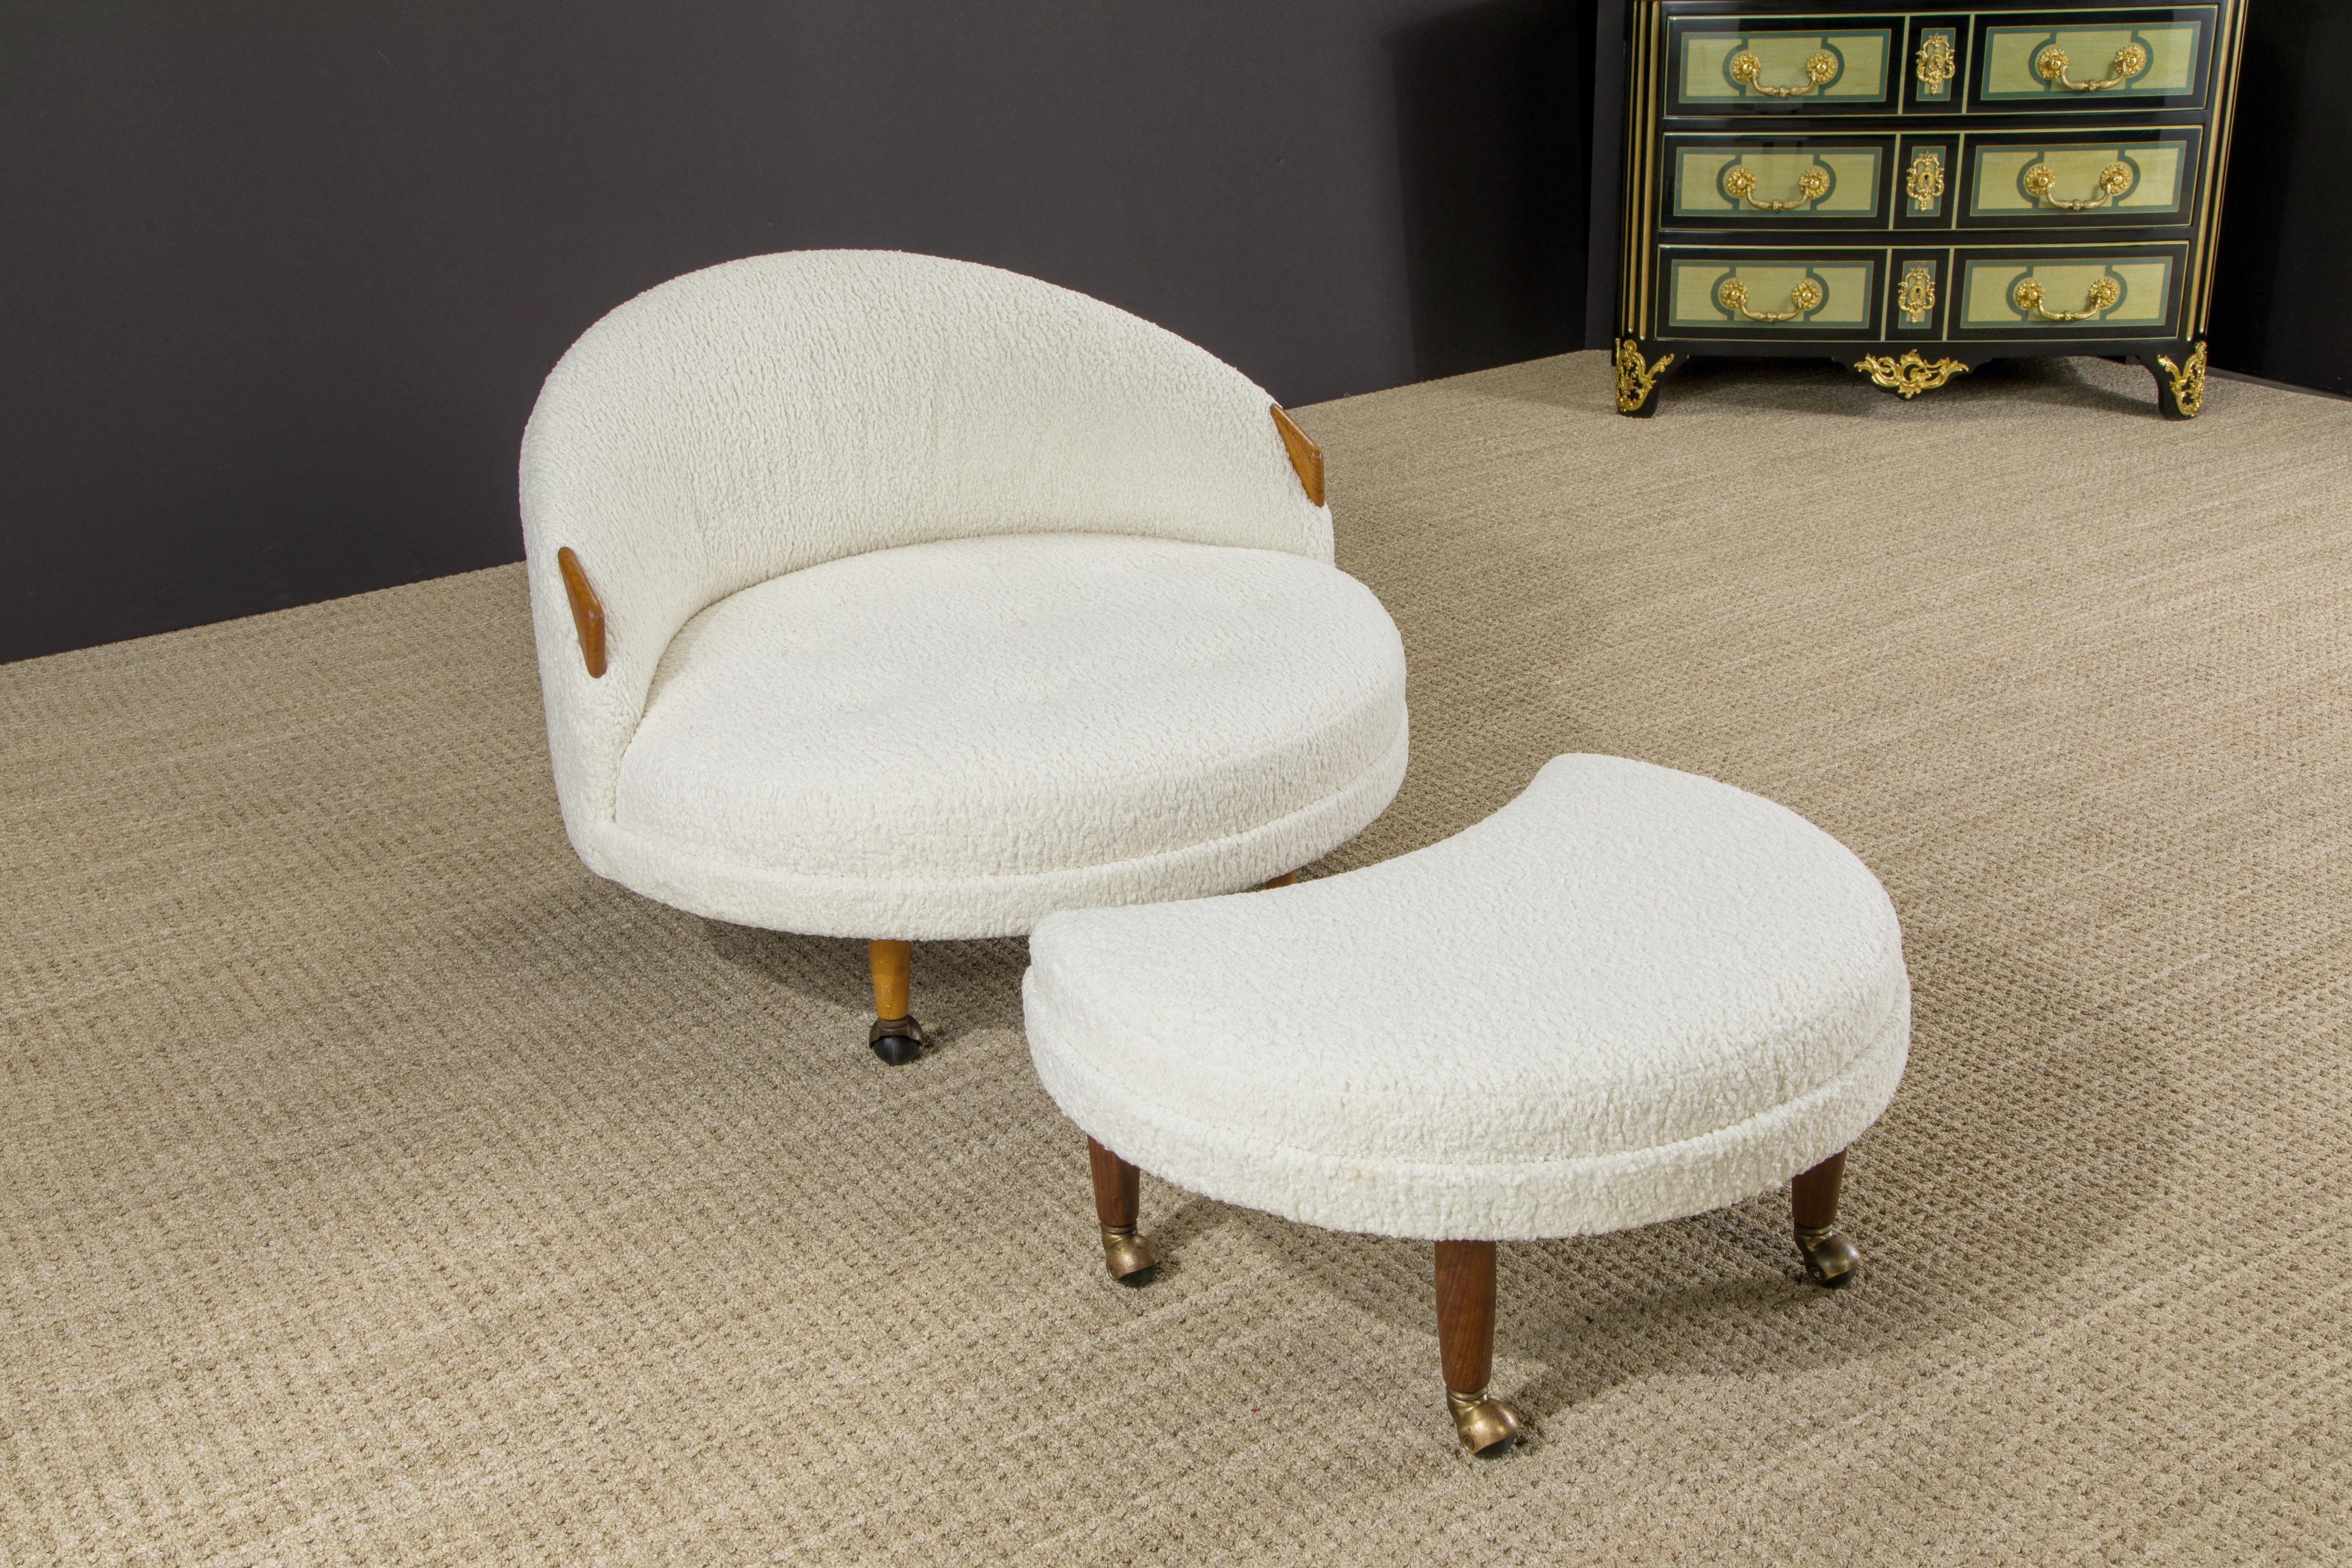 This large sized and spacious 'Havana' chair and ottoman by Adrian Pearsall was designed and produced in the 1960s. This gorgeous example features newly reupholstered bouclé fabric with button tufted seats, walnut arms and legs with brass casters.